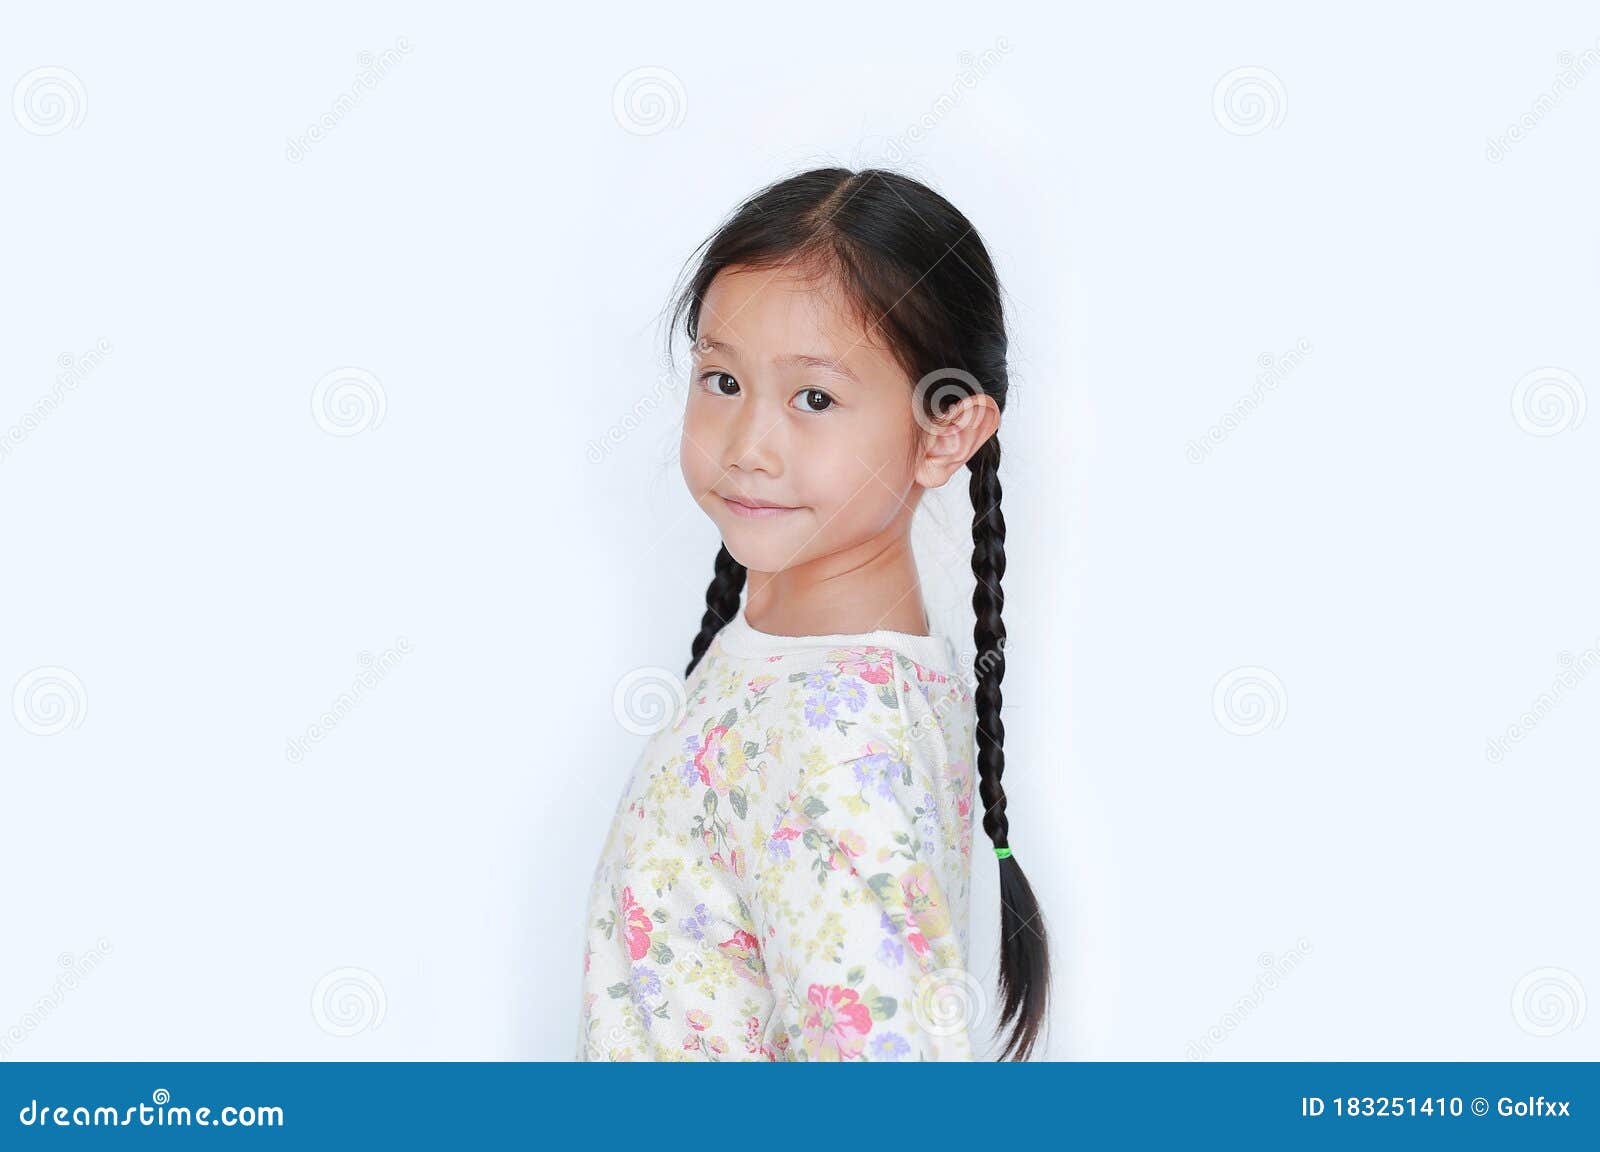 Portraits Of Smiling Asian Little Child Girl Looking Ca